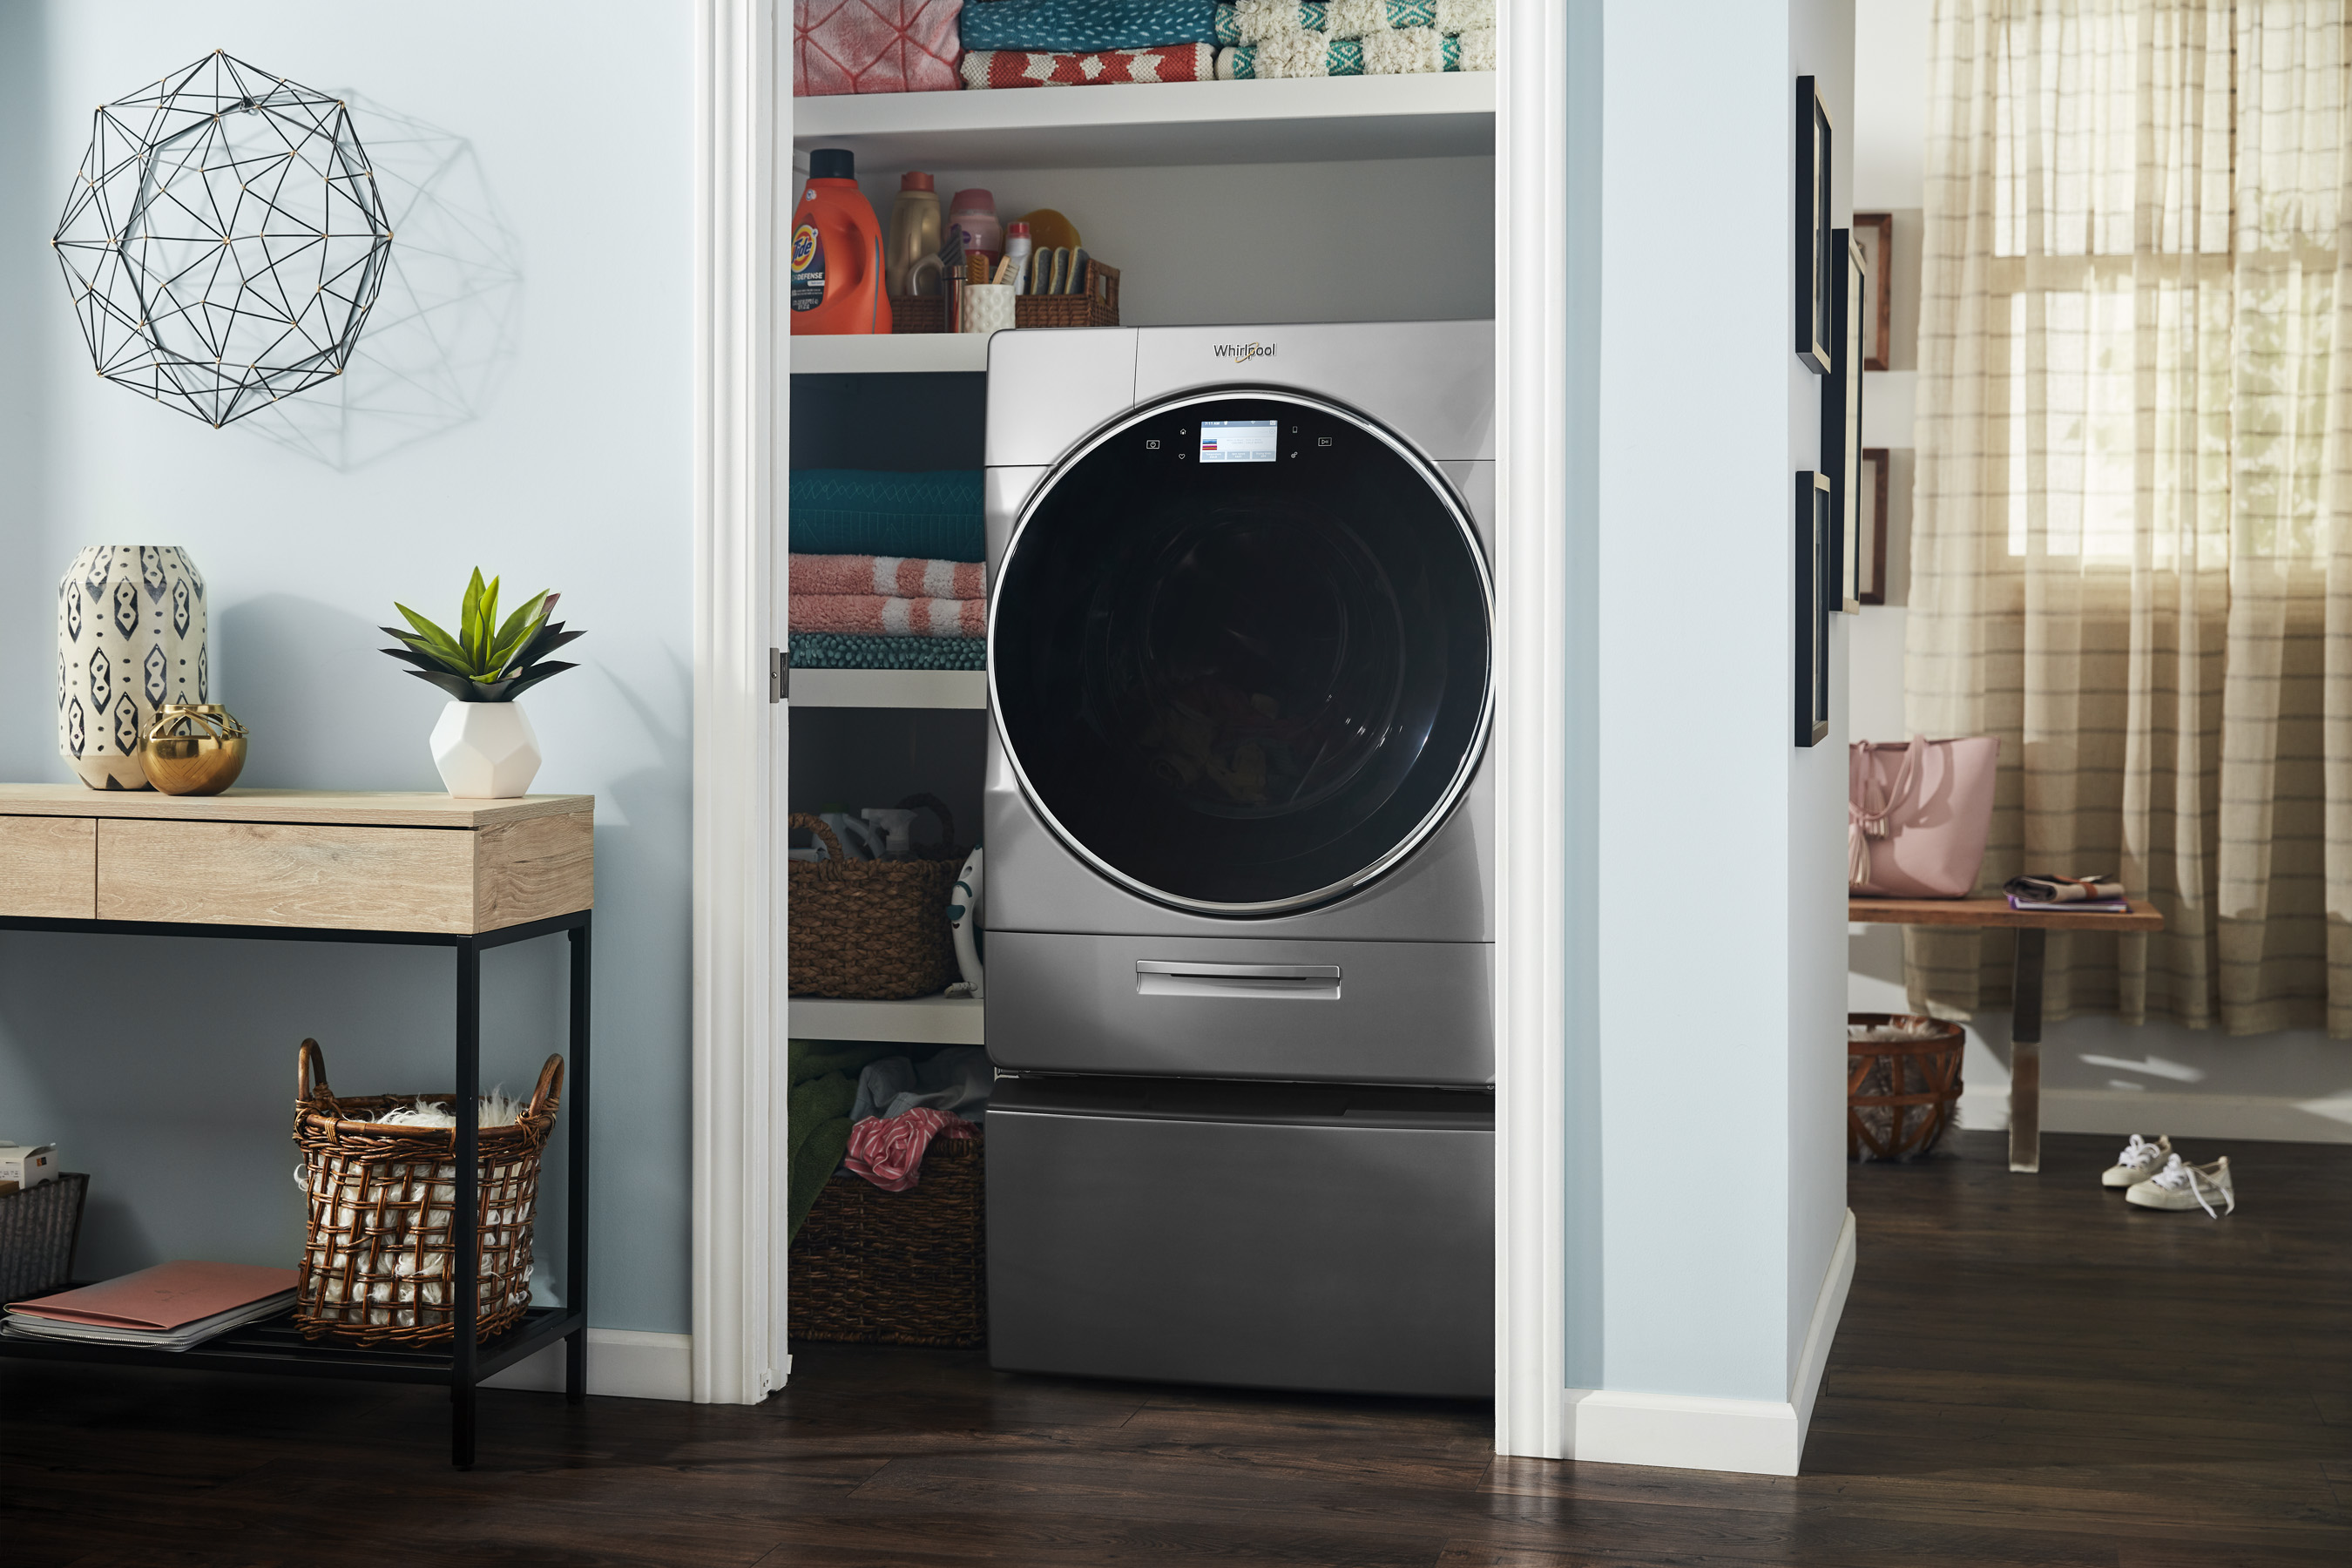 The Whirlpool® Smart All-In-One Washer & Dryer completes a load of laundry in the same machine.